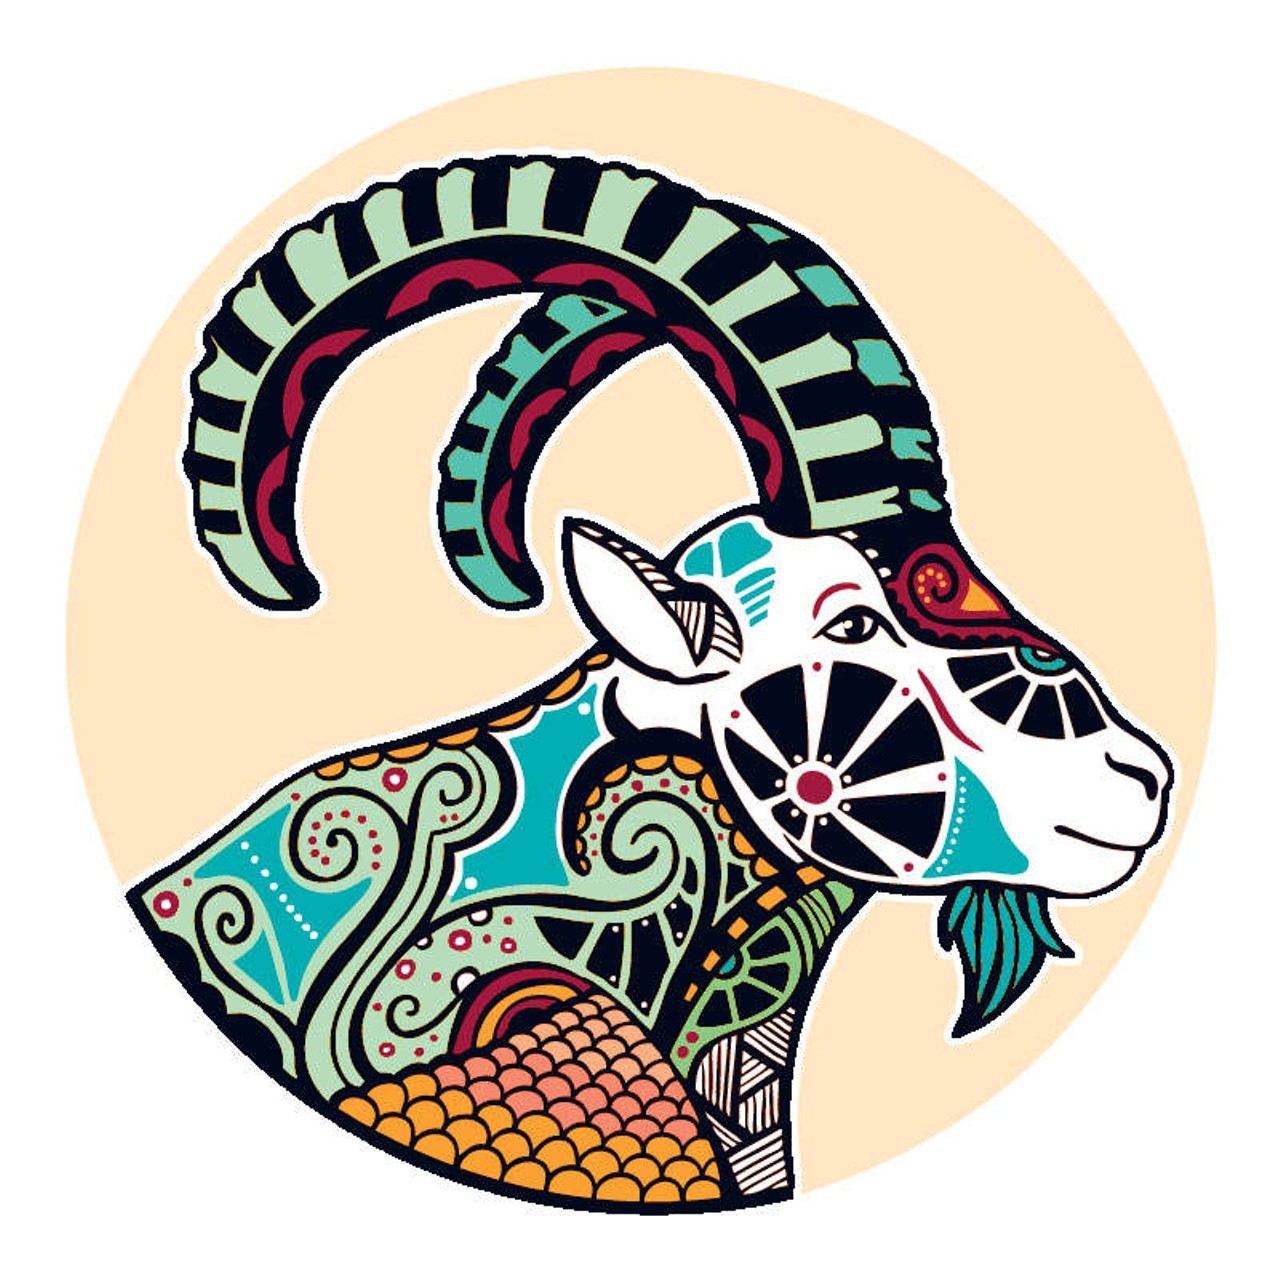 CAPRICORN: December 21 - January 20
People and their true colors are on the loudspeaker. You're smart enough to read between the lines; it's not like this is your first reality check. Not knowing who to trust and feeling out of touch with the things that used to keep you on an even keel, you're in a stretch of terrain in which your instincts are your best ally. Being someone who has a tough time relying too much on things that you can neither see, smell, or touch, letting go of your control issues is where it's at, right now. A new approach is mandatory. This will involve seeing that you have nothing to lose.